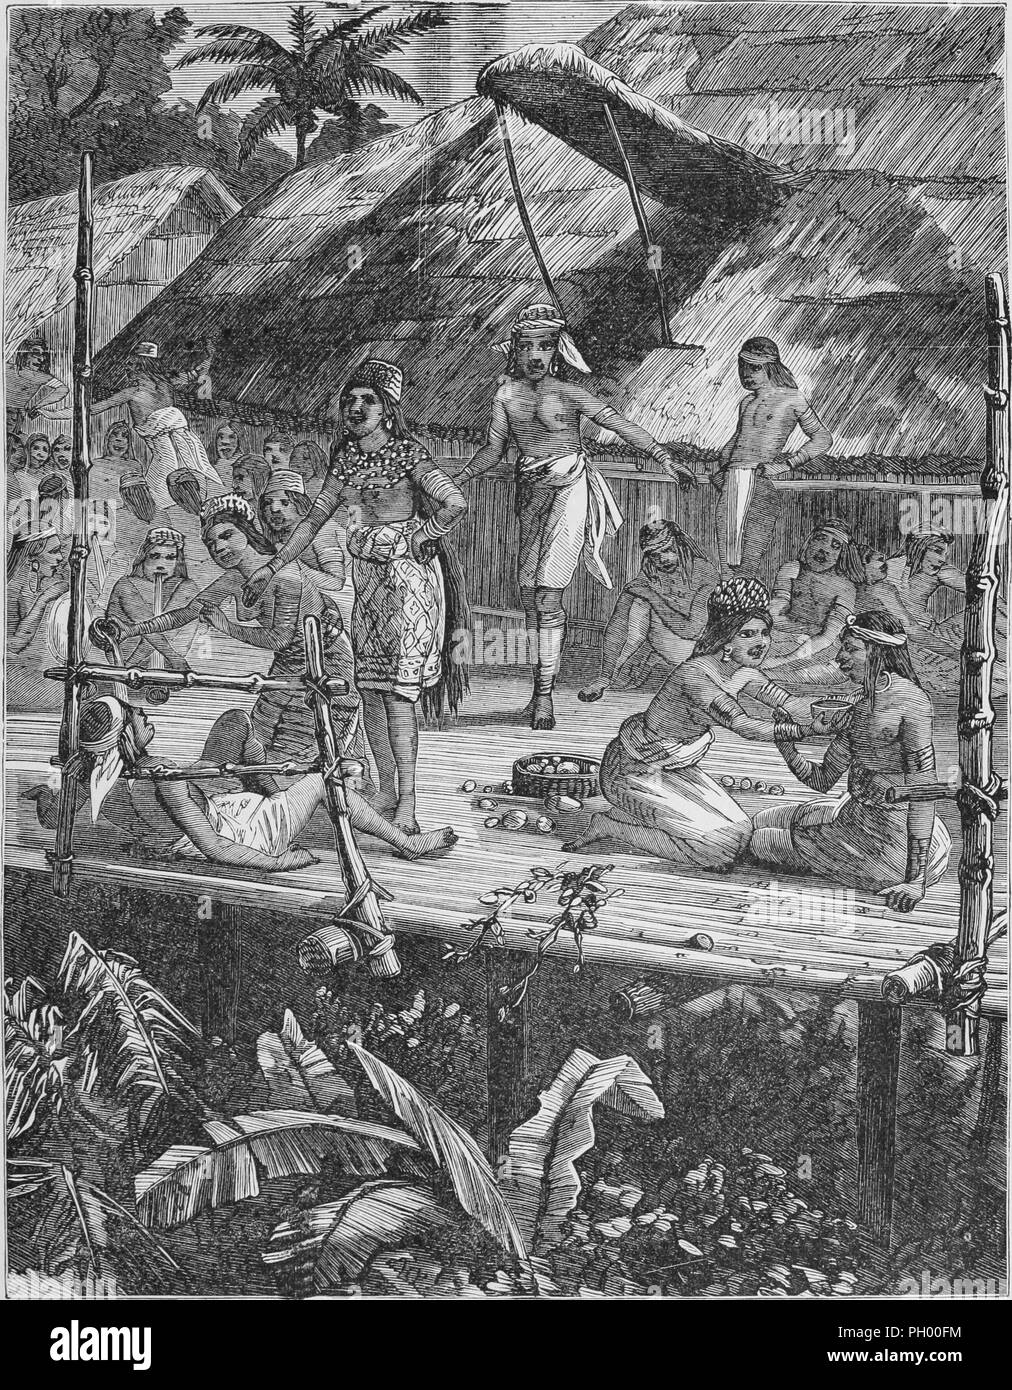 Black and white vintage print, depicting a bamboo porch with several Dayak women, wearing sarongs, headwraps, and bracelets, inducing Dayak men to drink tuak (palm wine) to the point of extreme intoxication, with more Dayak feasting on tuak in the background, located in Borneo, published in John George Wood's volume 'The uncivilized races of men in all countries of the world, being a comprehensive account of their manners and customs, and of their physical, social, mental, moral and religious characteristics', 1877. Courtesy Internet Archive. () Stock Photo